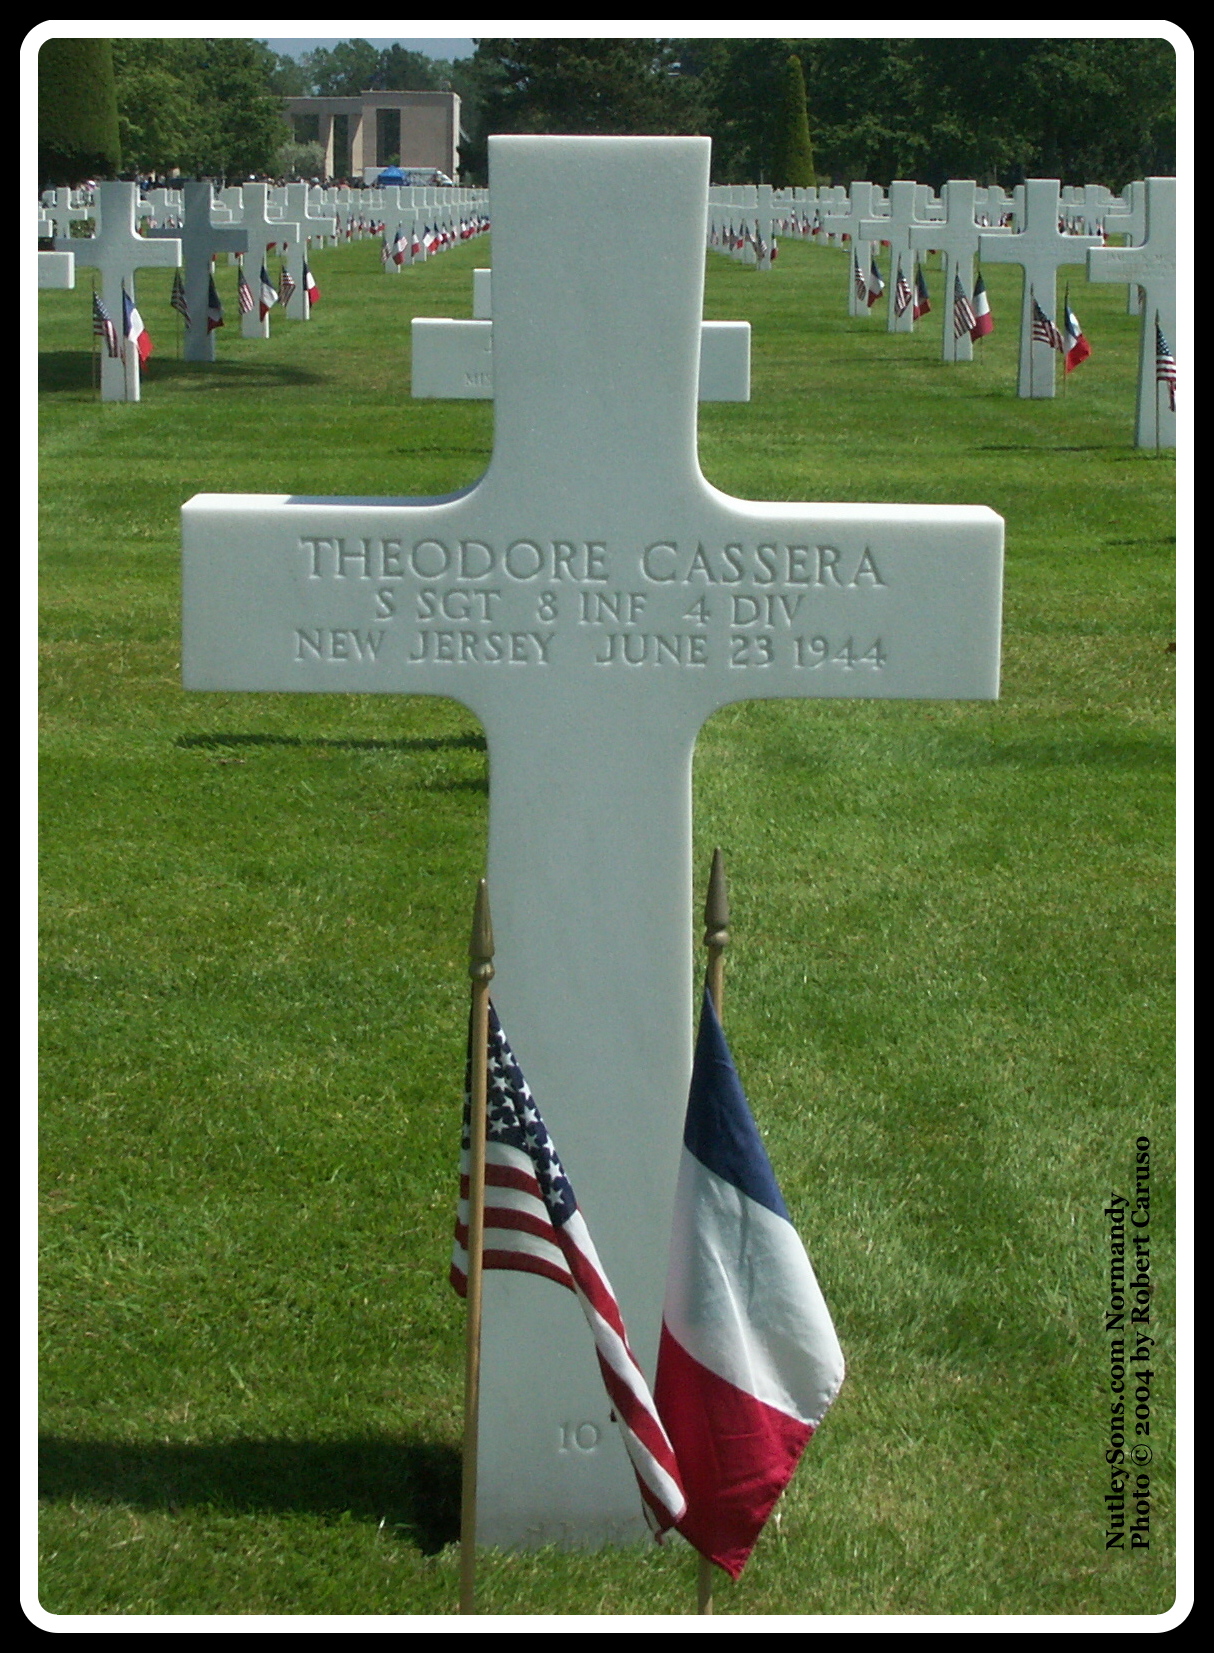 Normandy Photo Copyright © 2004 by Robert Caruso, used by permission